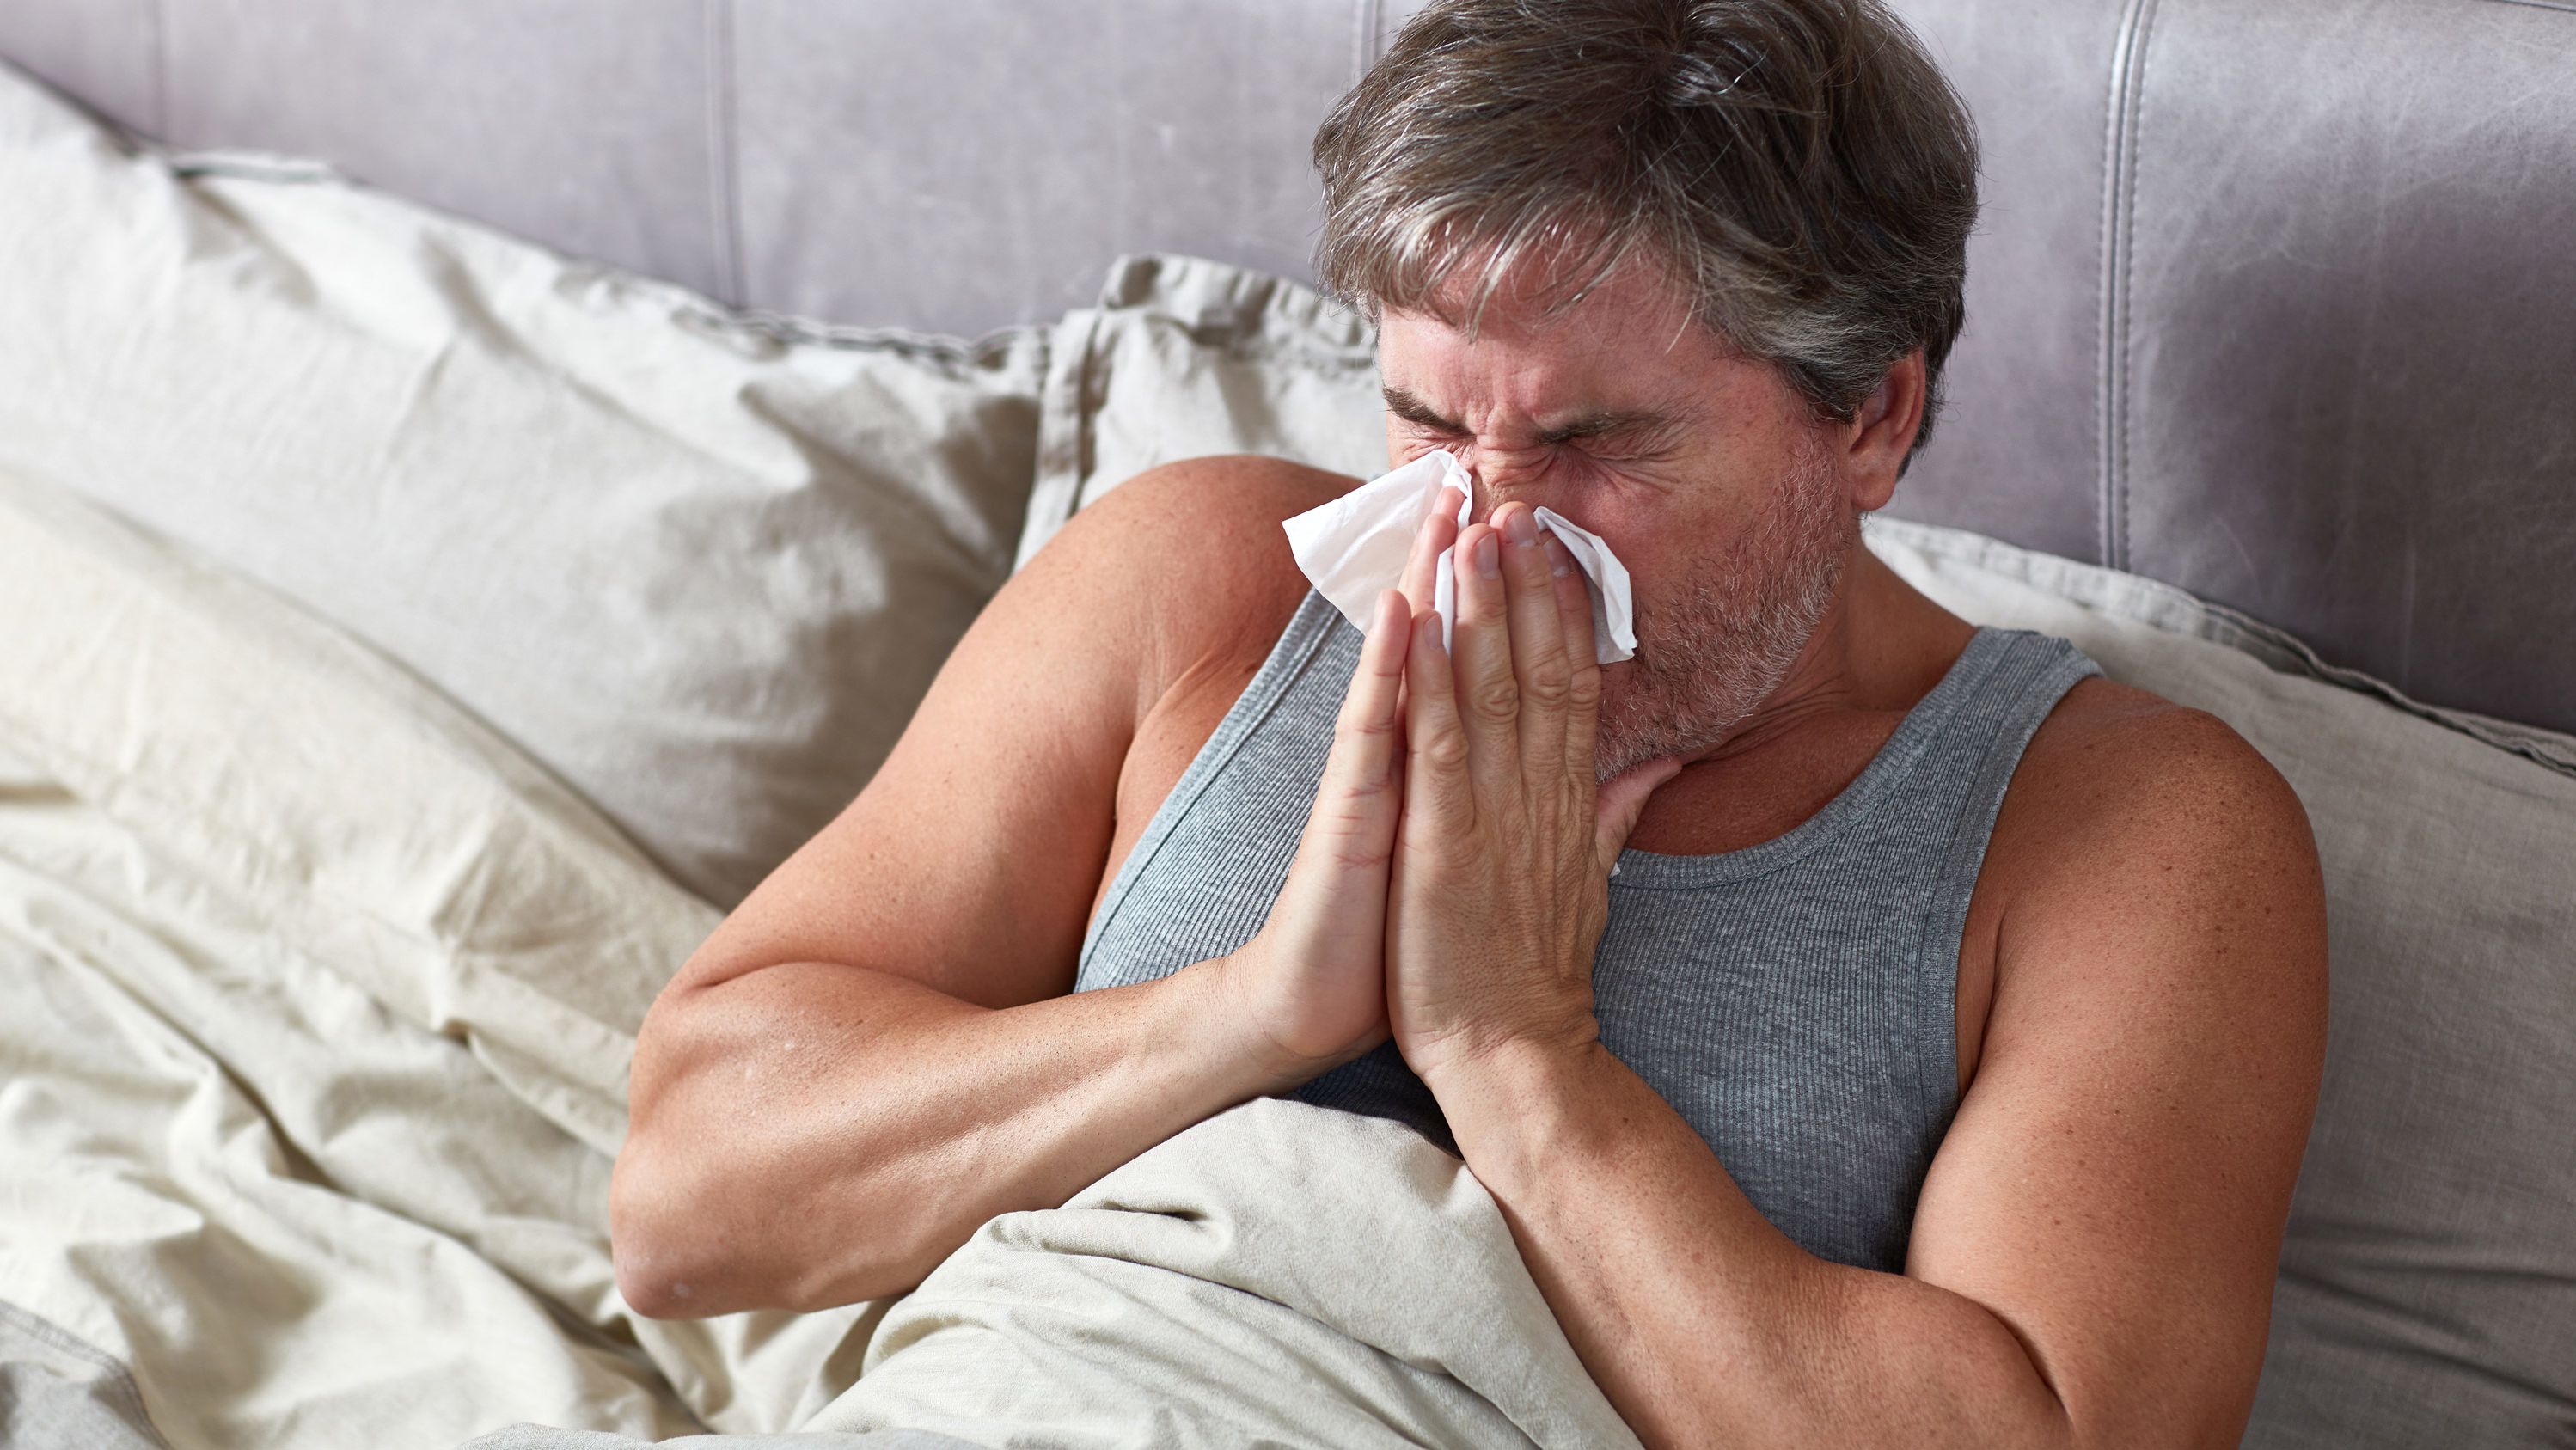 Adults over 50 who got flu vaccines during a hospitalization had a 28% lower risk of a heart attack the following year, researchers told an American Heart Association meeting on Monday.